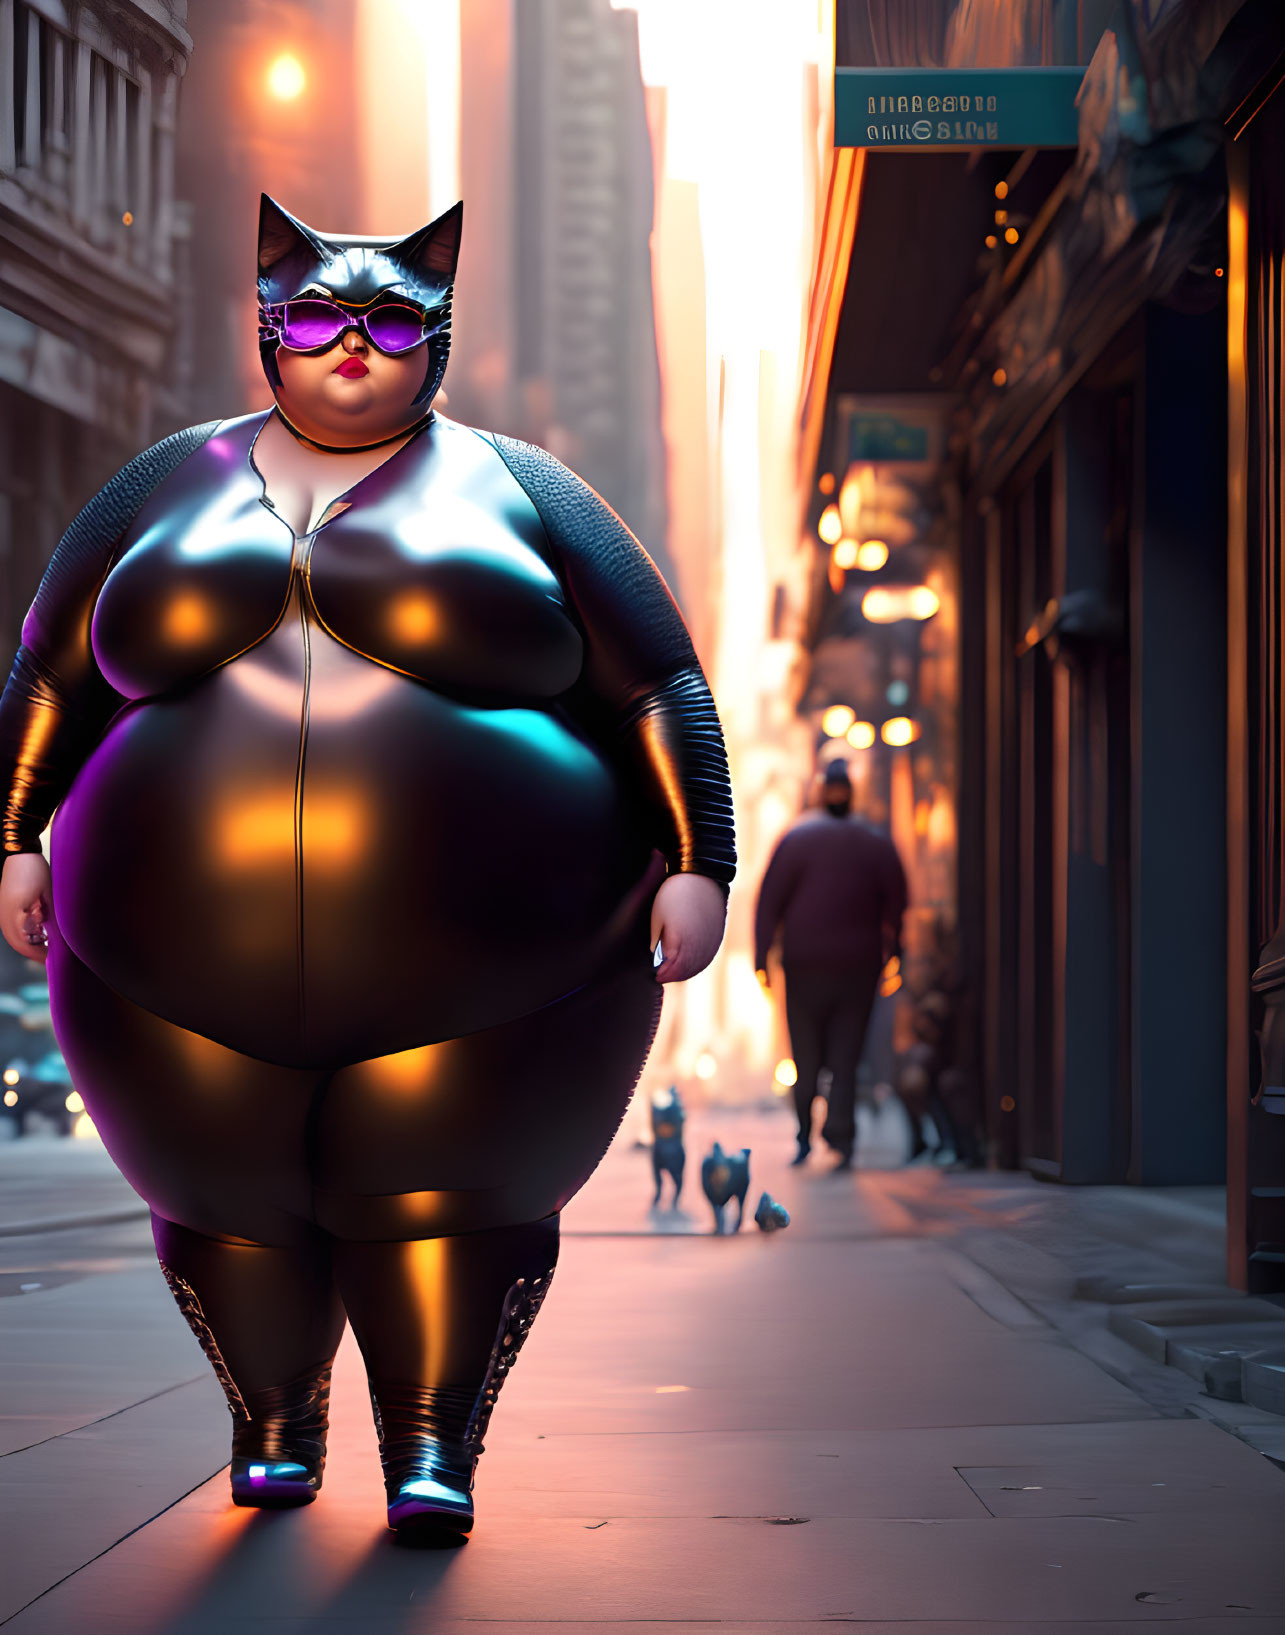 Stylized image of plus-size woman in shiny cat costume on city street